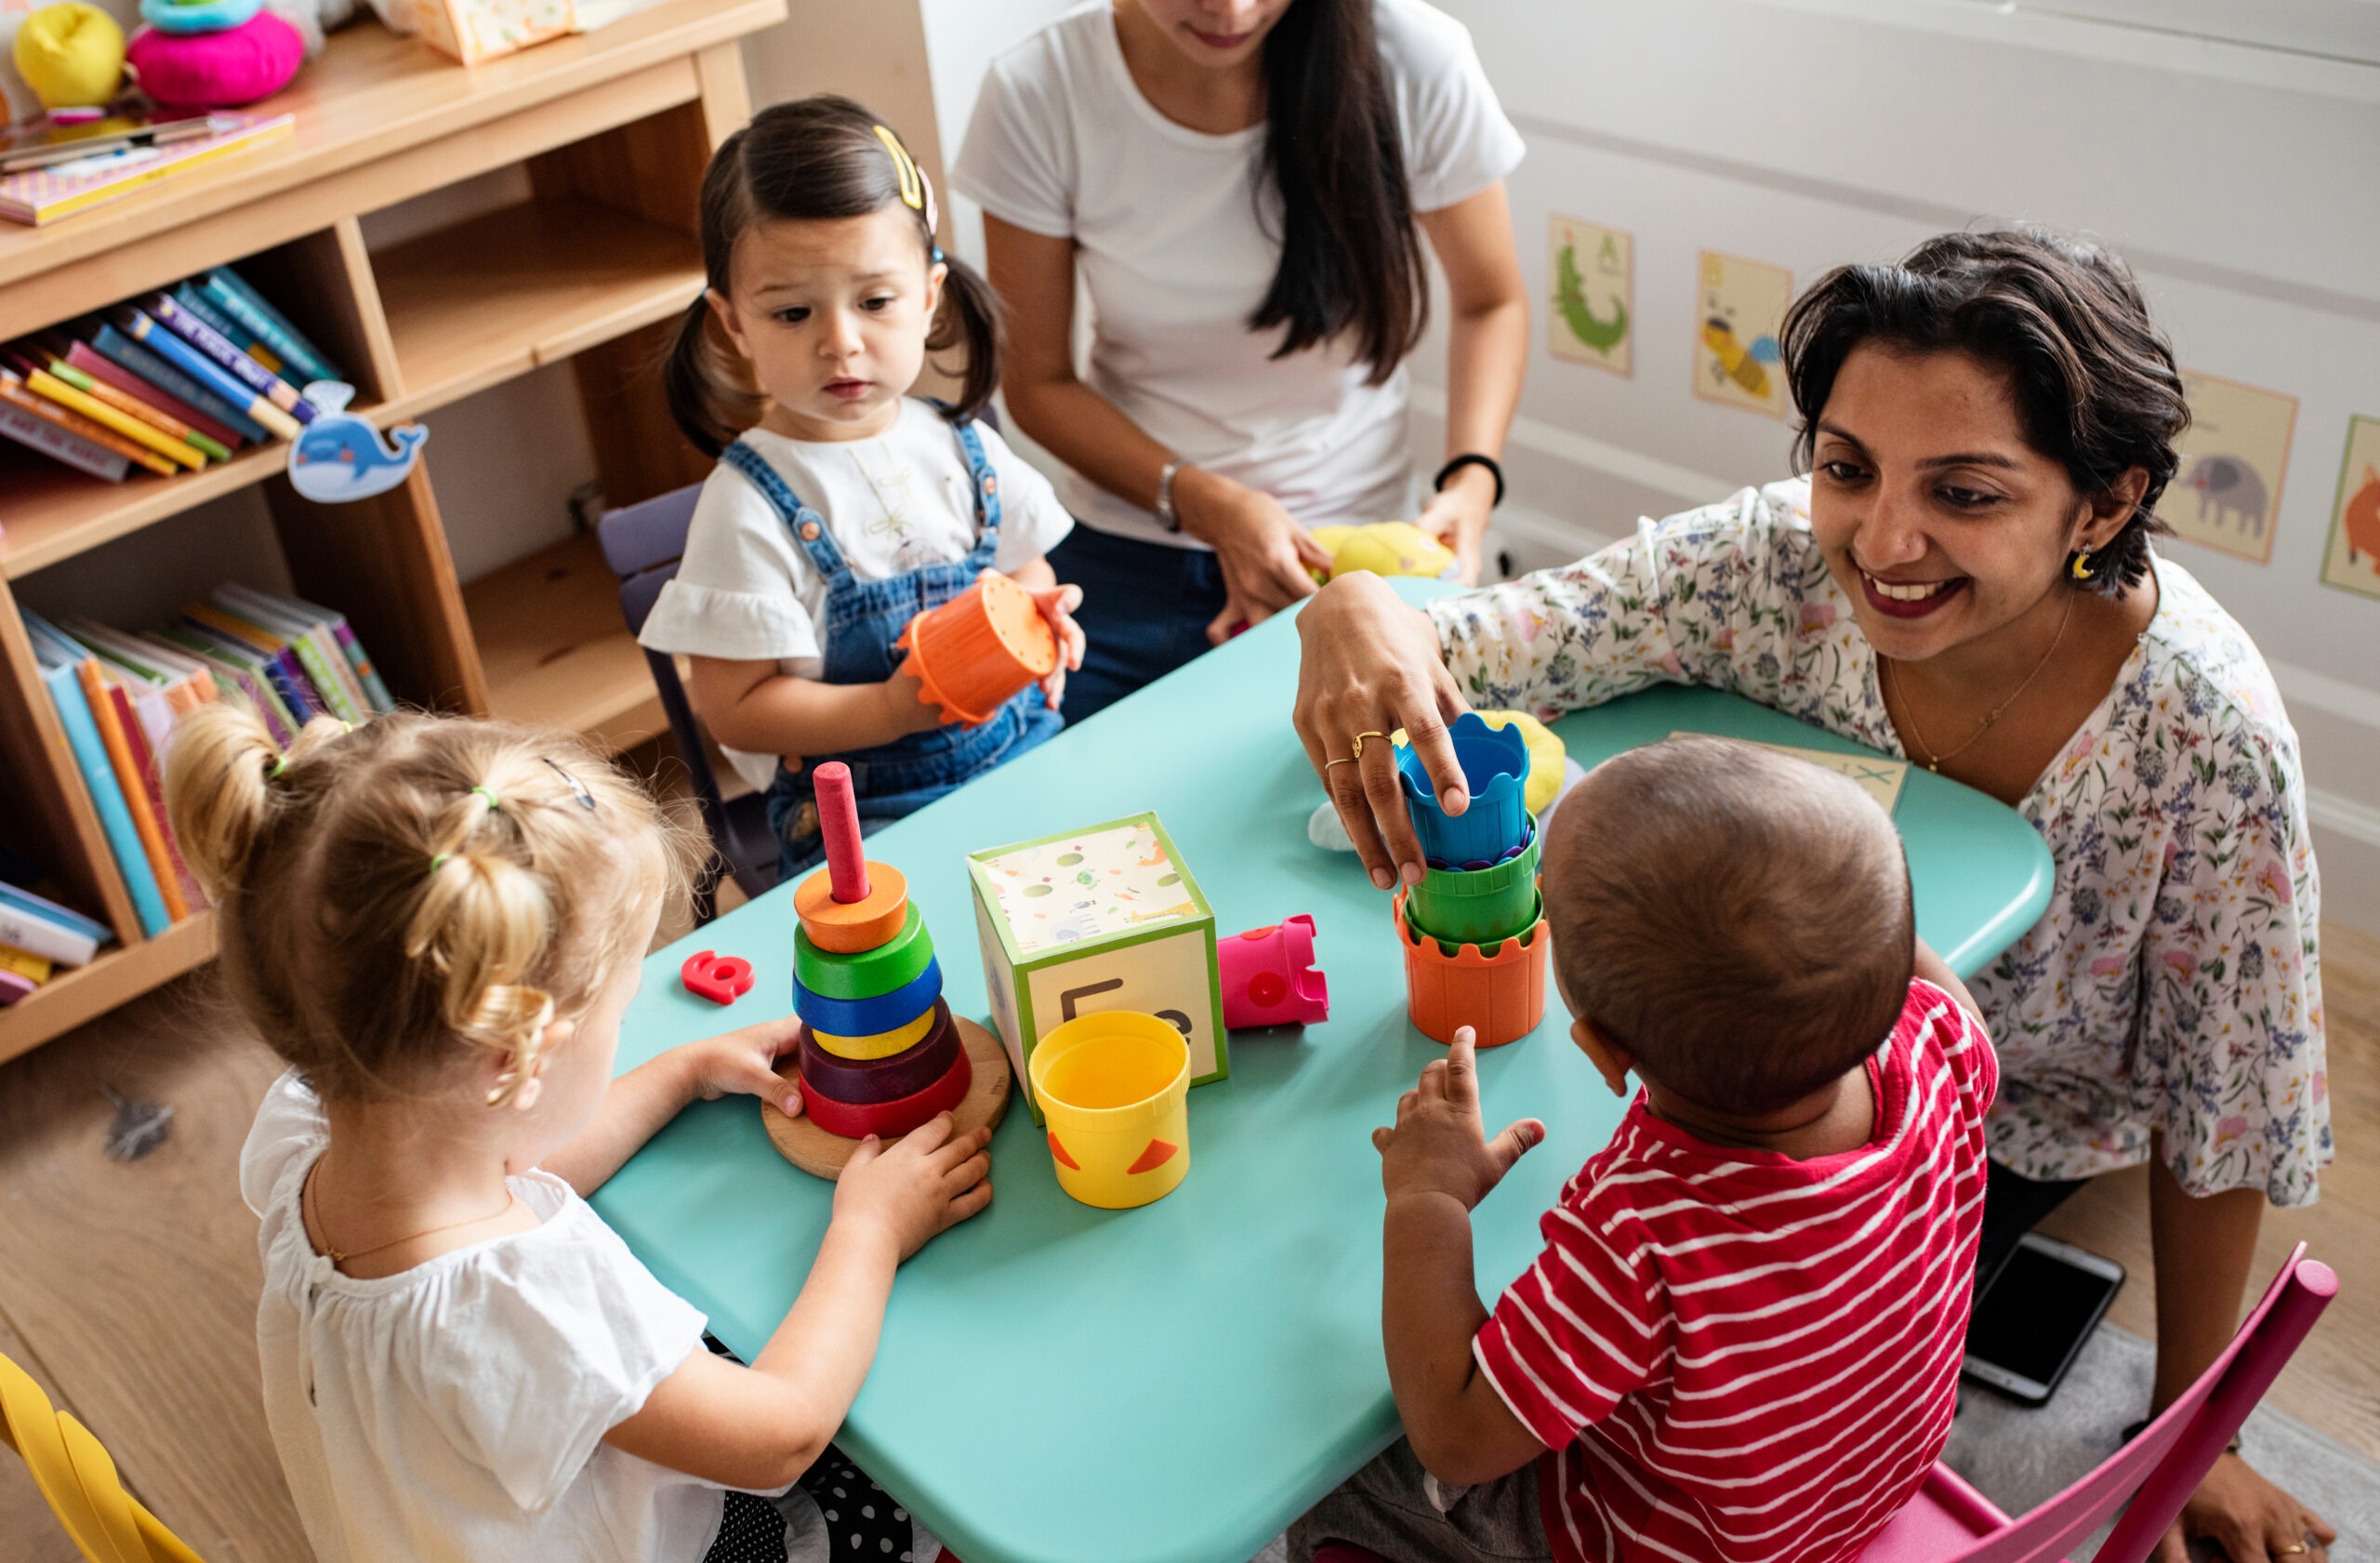 A teacher playing with children at daycare | Source: Shutterstock